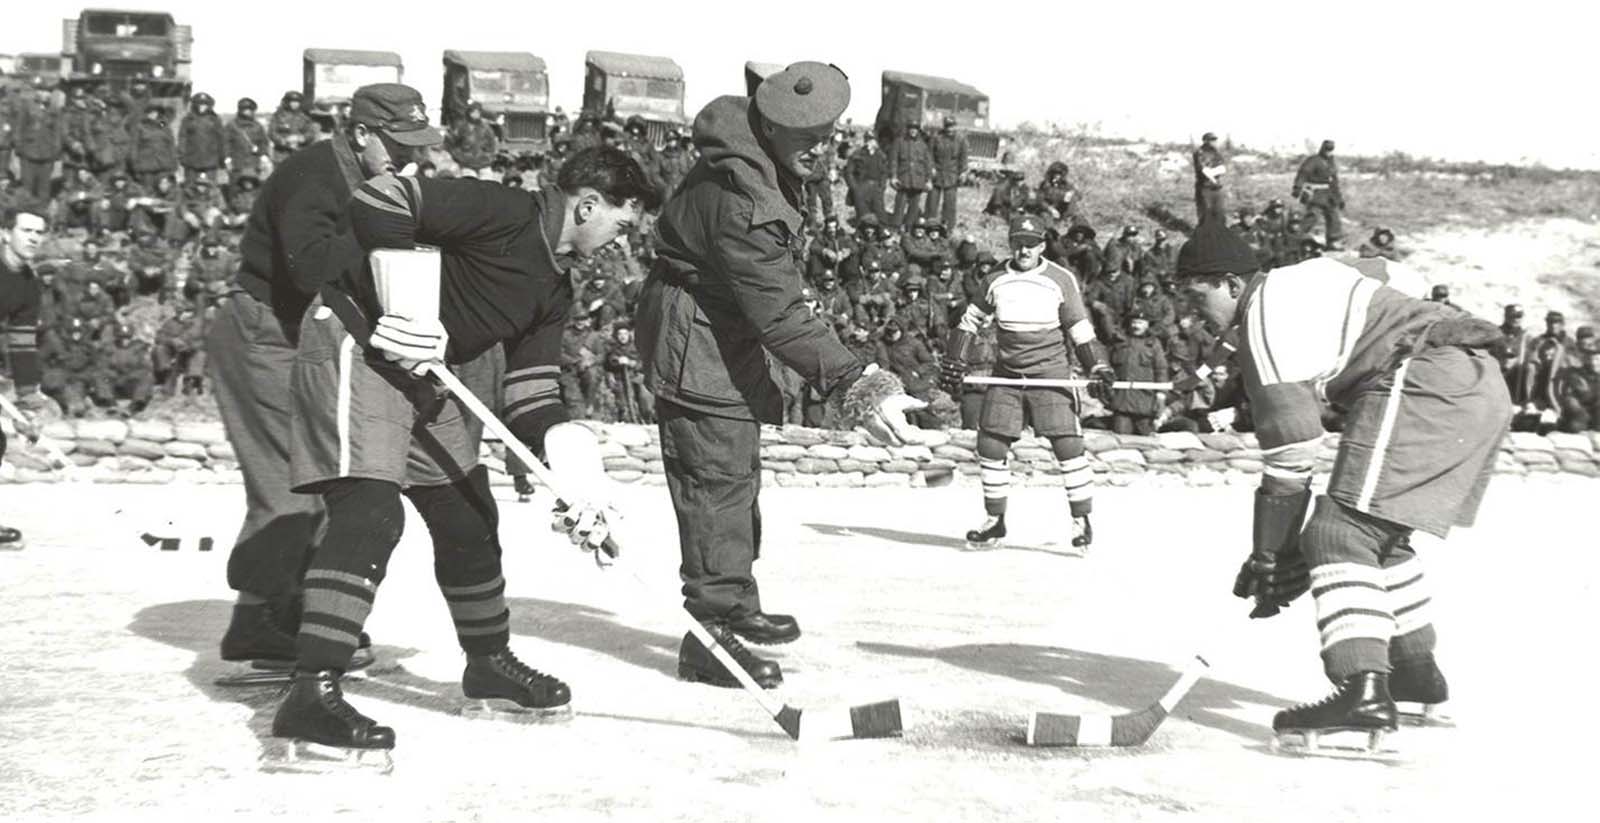 Brigadier John Rockingham drops the puck for a match between 1st Battalion, Princess Patricia’s Canadian Light Infantry (left) and 2nd Battalion, Royal 22e Regiment “Vandoos” (right) during the Korean War. Playing for the Patricias was Private W. Wolfe. For the Royal 22e Regiment, Private R. Halley. 